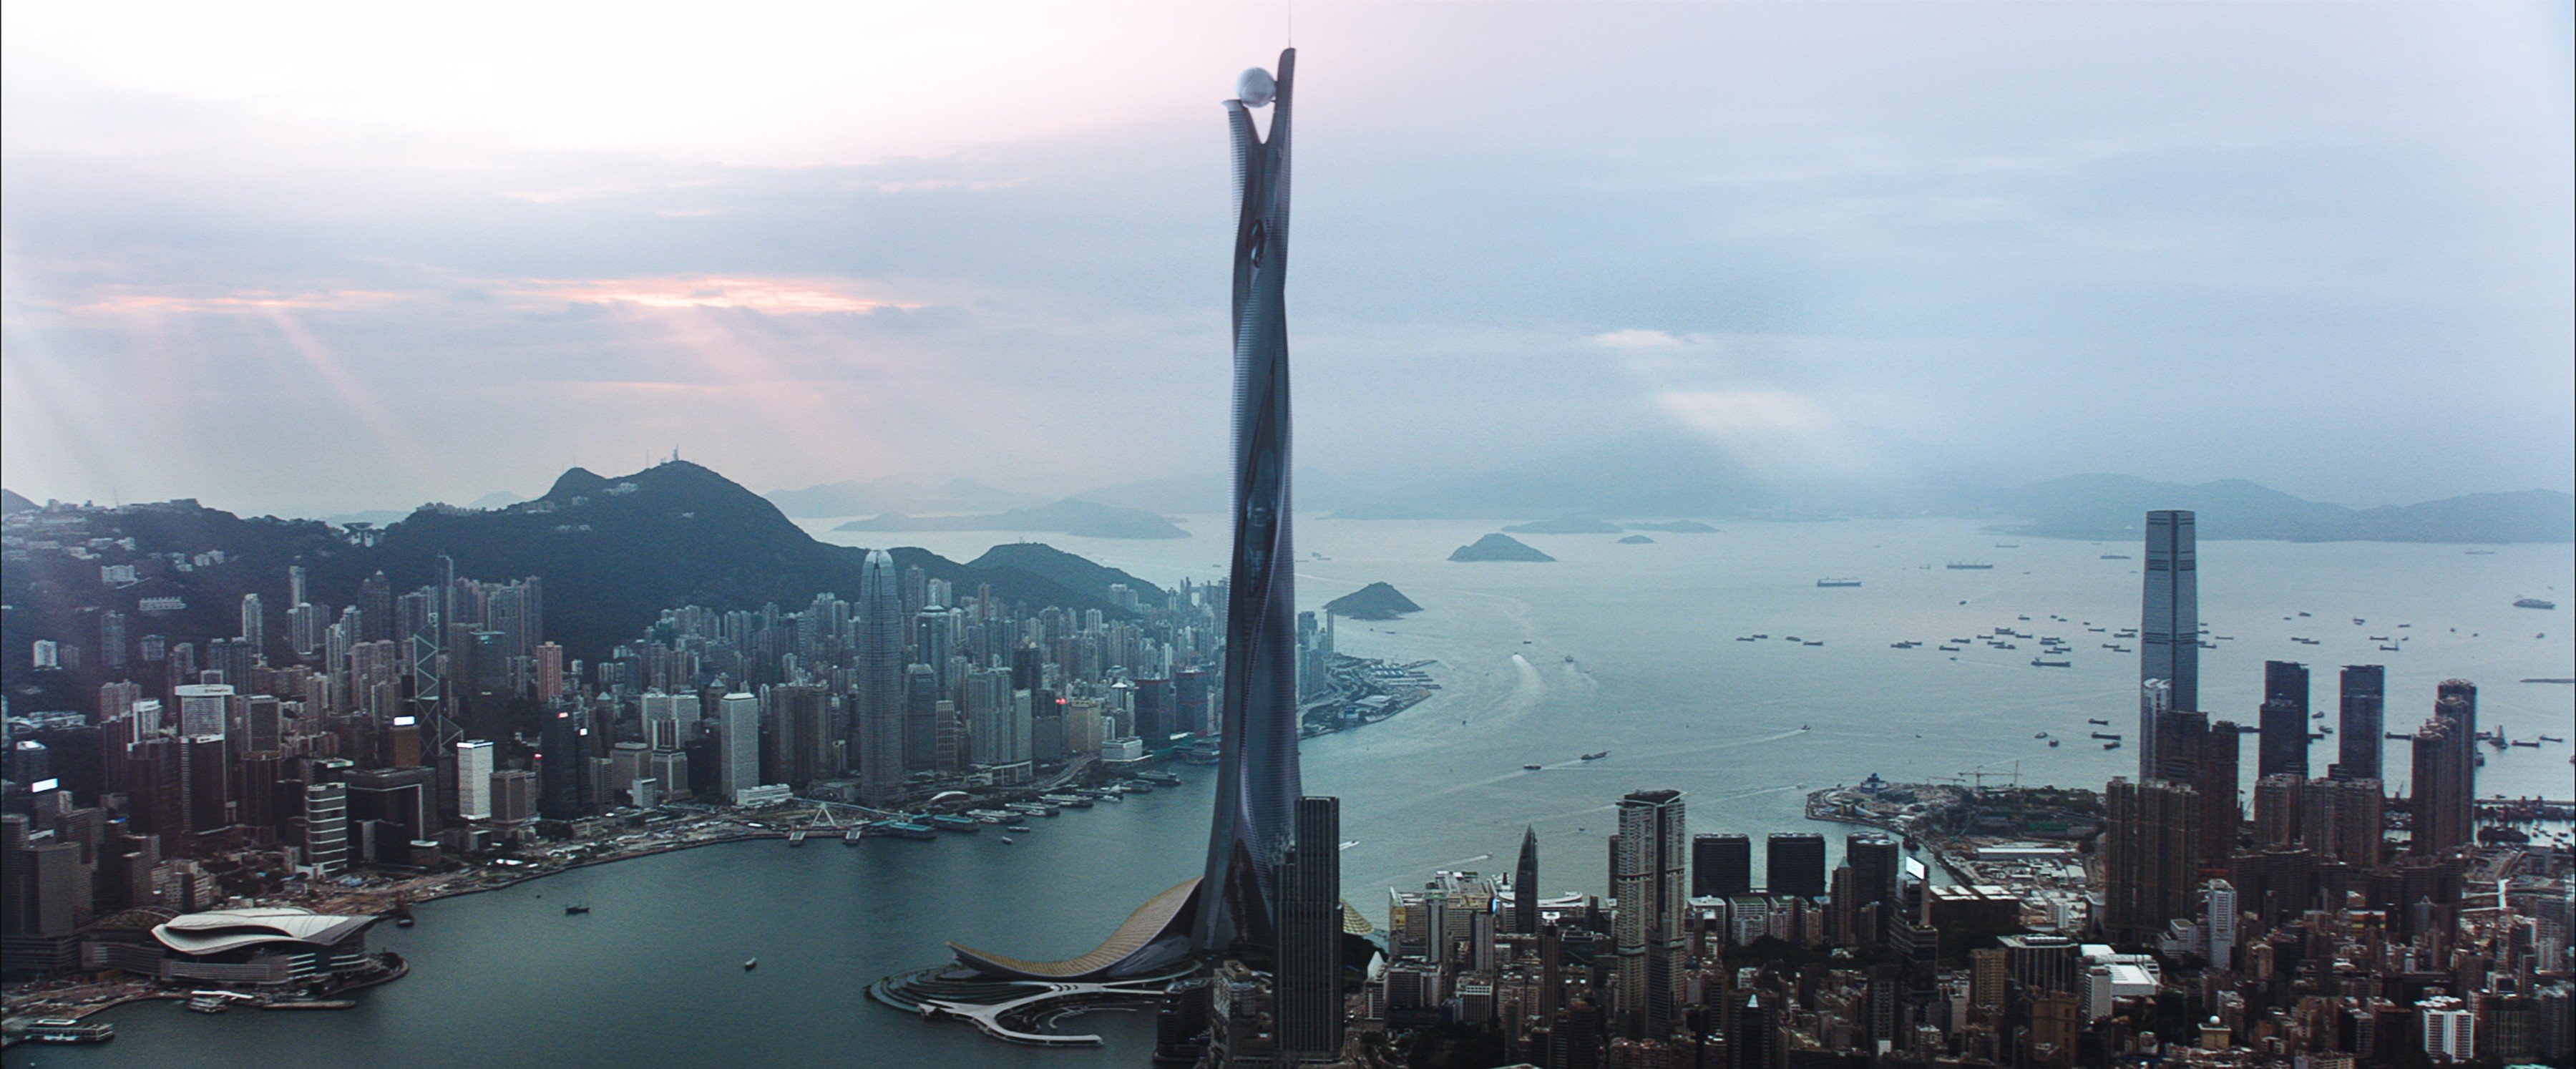 The Pearl, a fictional skyscraper, is the world's tallest skyscraper at 3,500 feet tall in the movie Skyscraper, set in Hong Kong. Photo: Handout